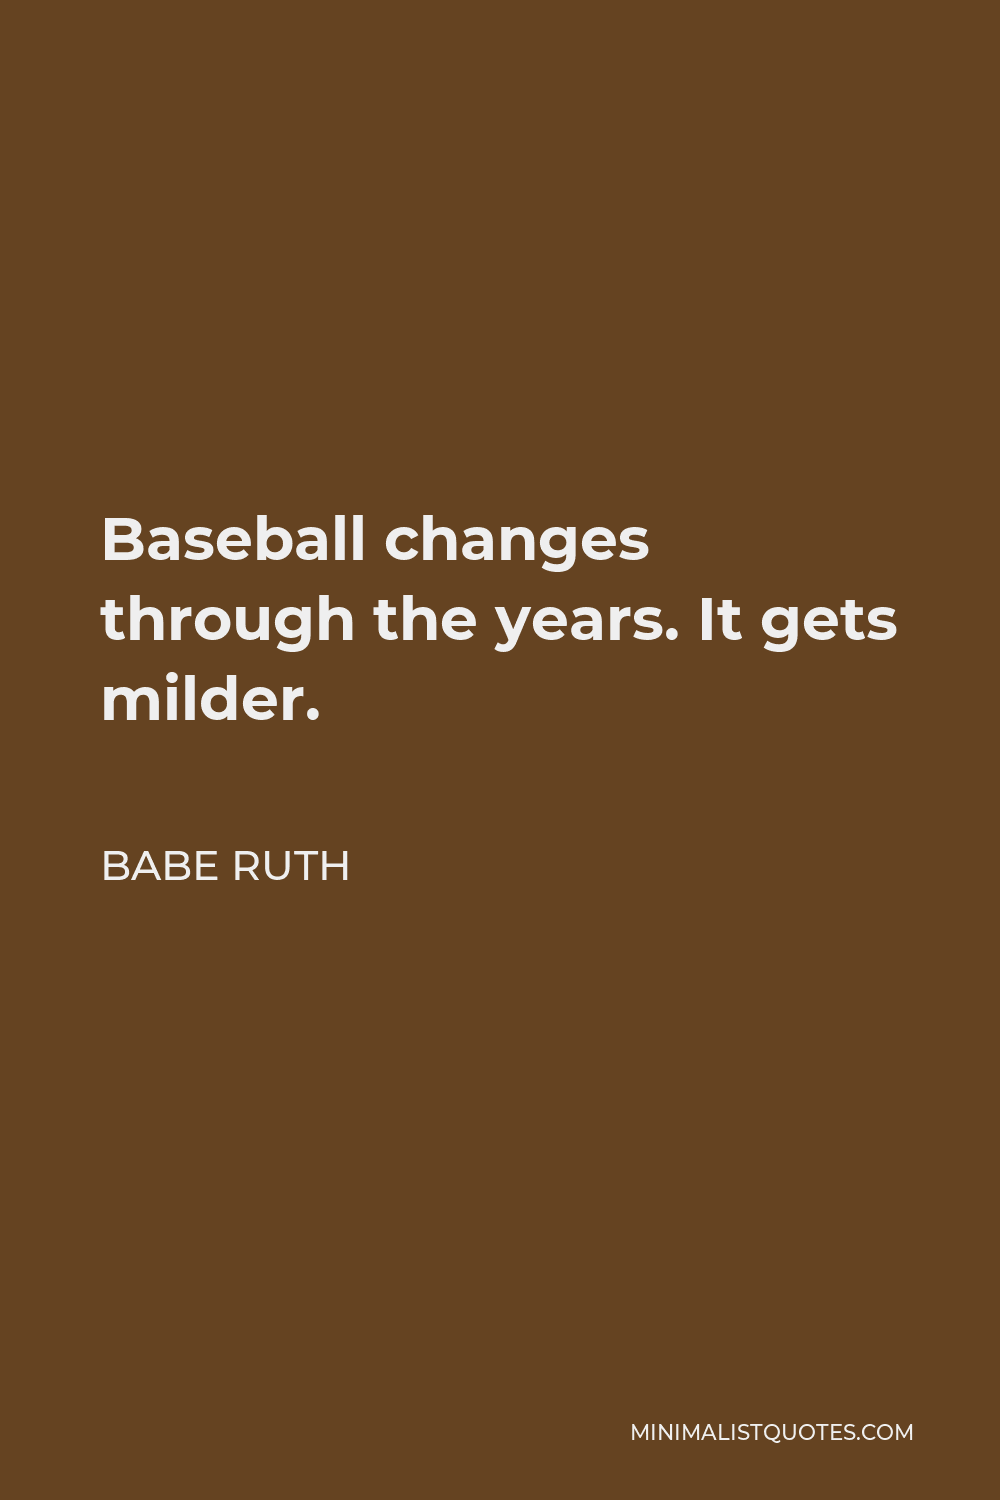 Babe Ruth Quote - Baseball changes through the years. It gets milder.